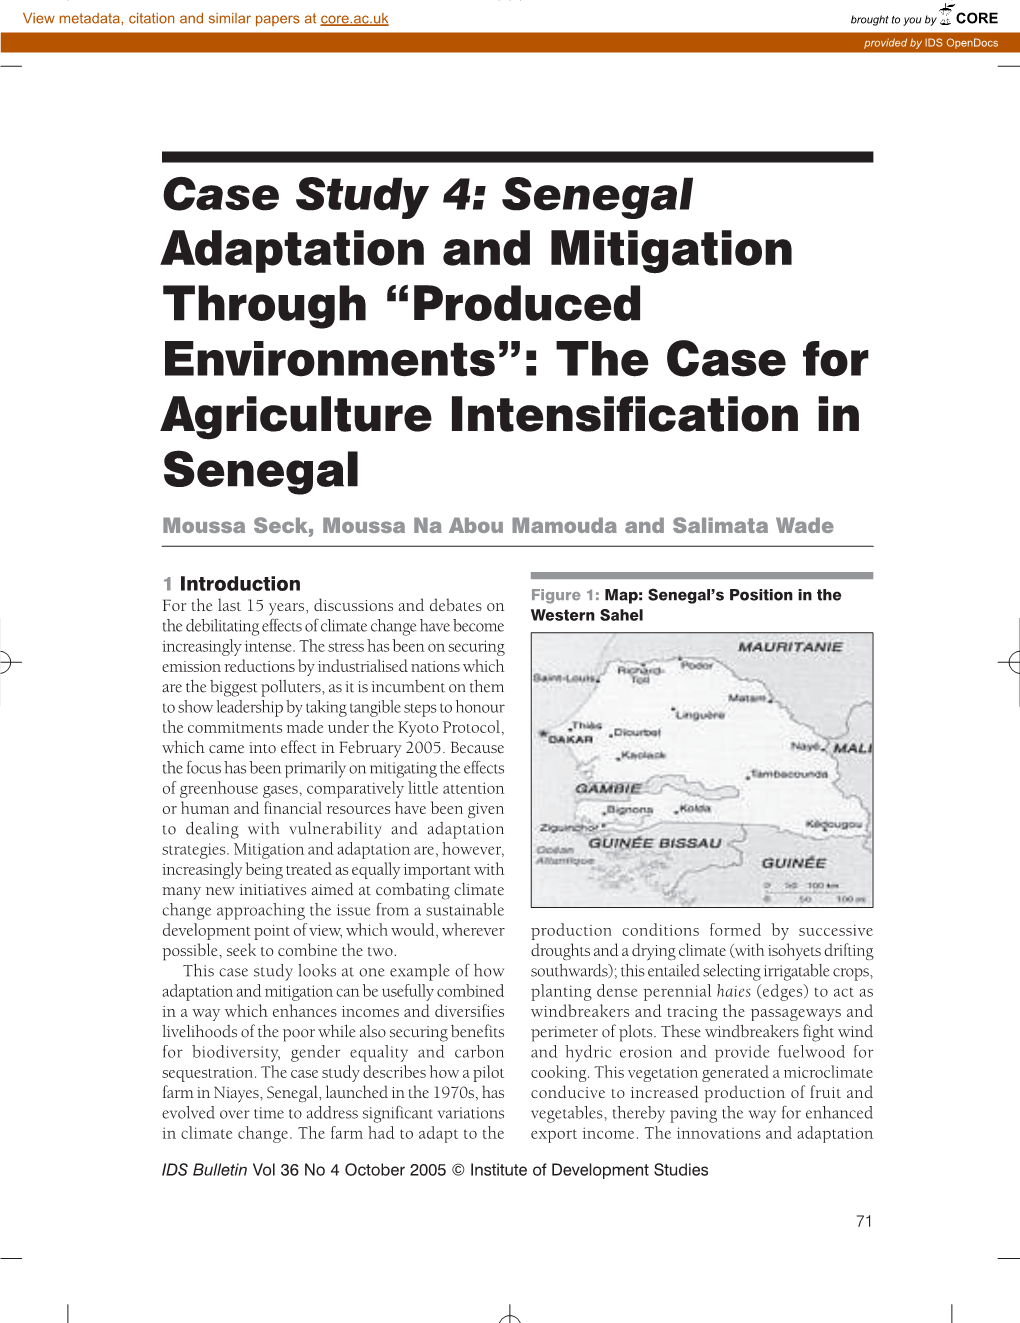 Senegal Adaptation and Mitigation Through “Produced Environments”: the Case for Agriculture Intensification in Senegal